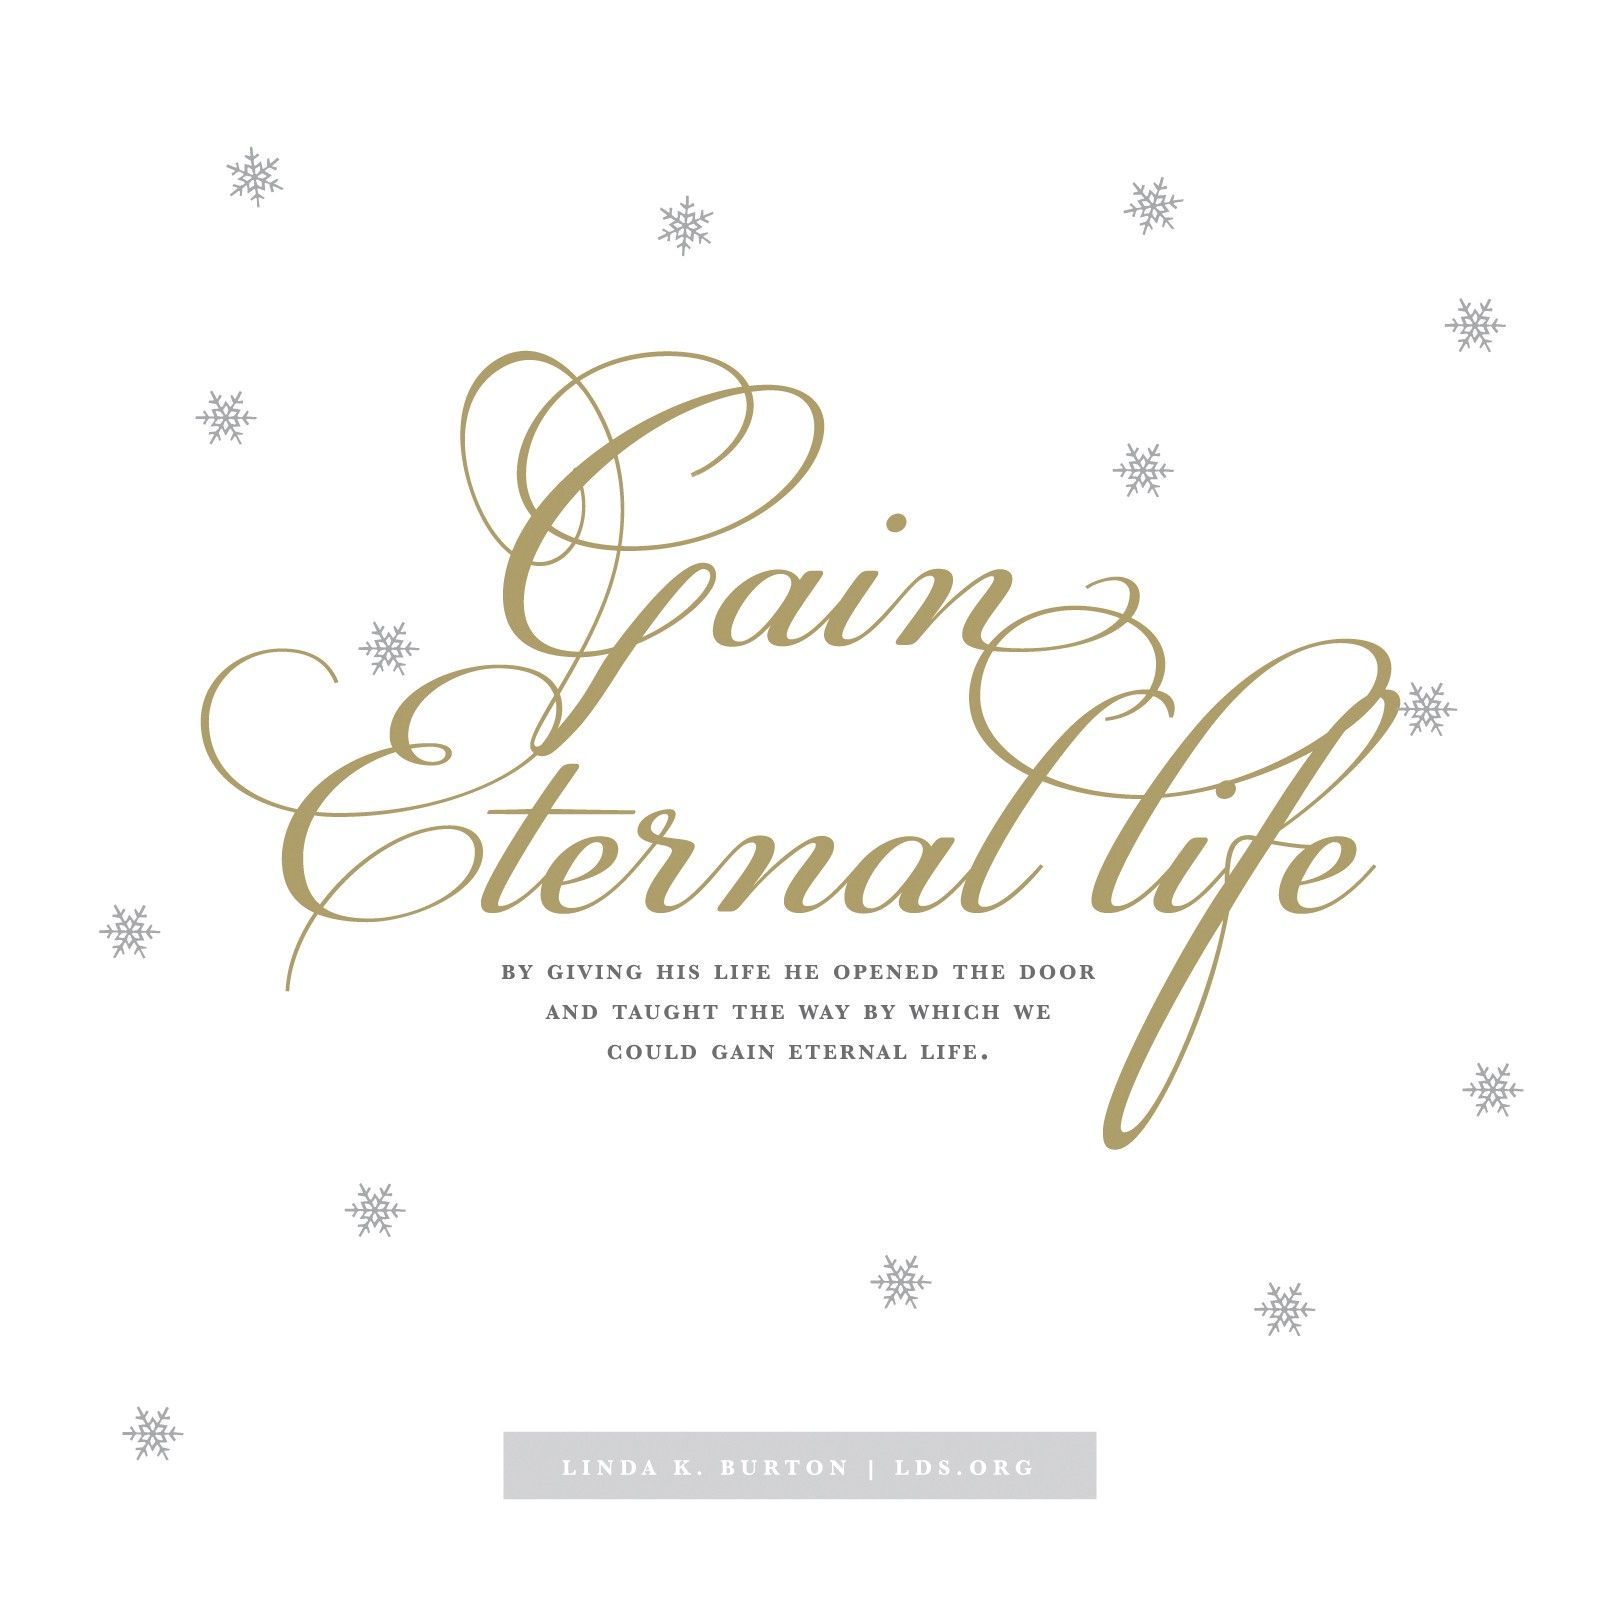 “By giving His life He opened the door and taught the way by which we could gain eternal life.” —Sister Linda K. Burton, “Oh, Come, Let Us Adore Him—and the Plan!”